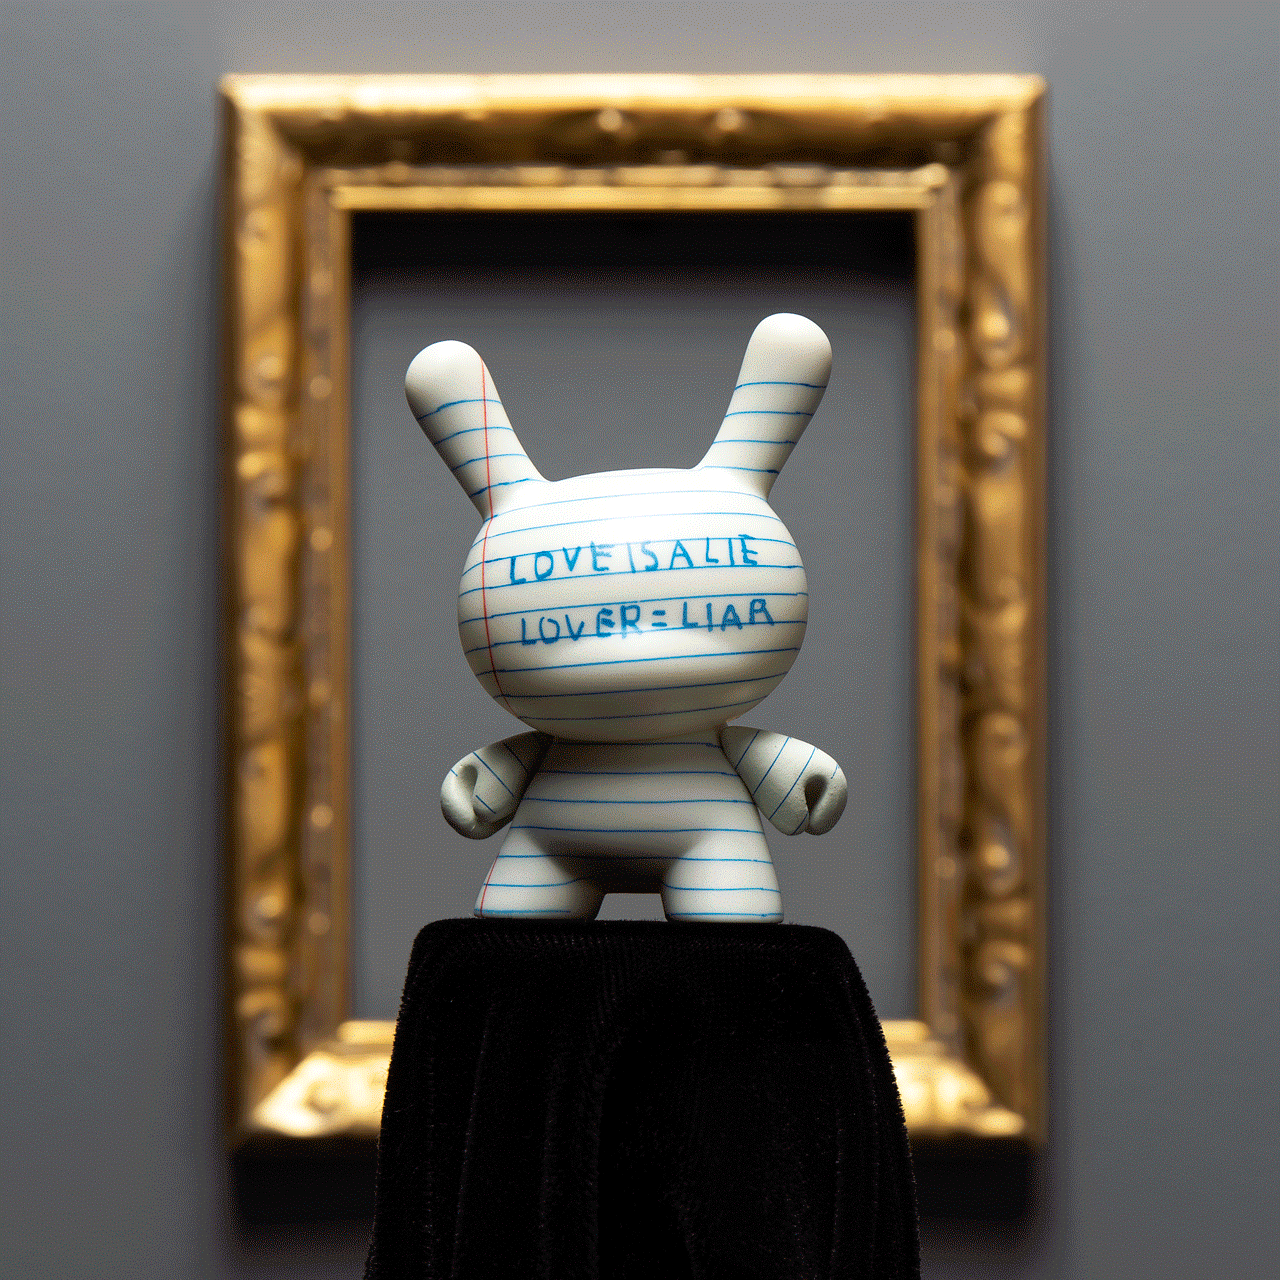 jean michel basquiat x kidrobot dunny art figure series launches dolphin paintings small